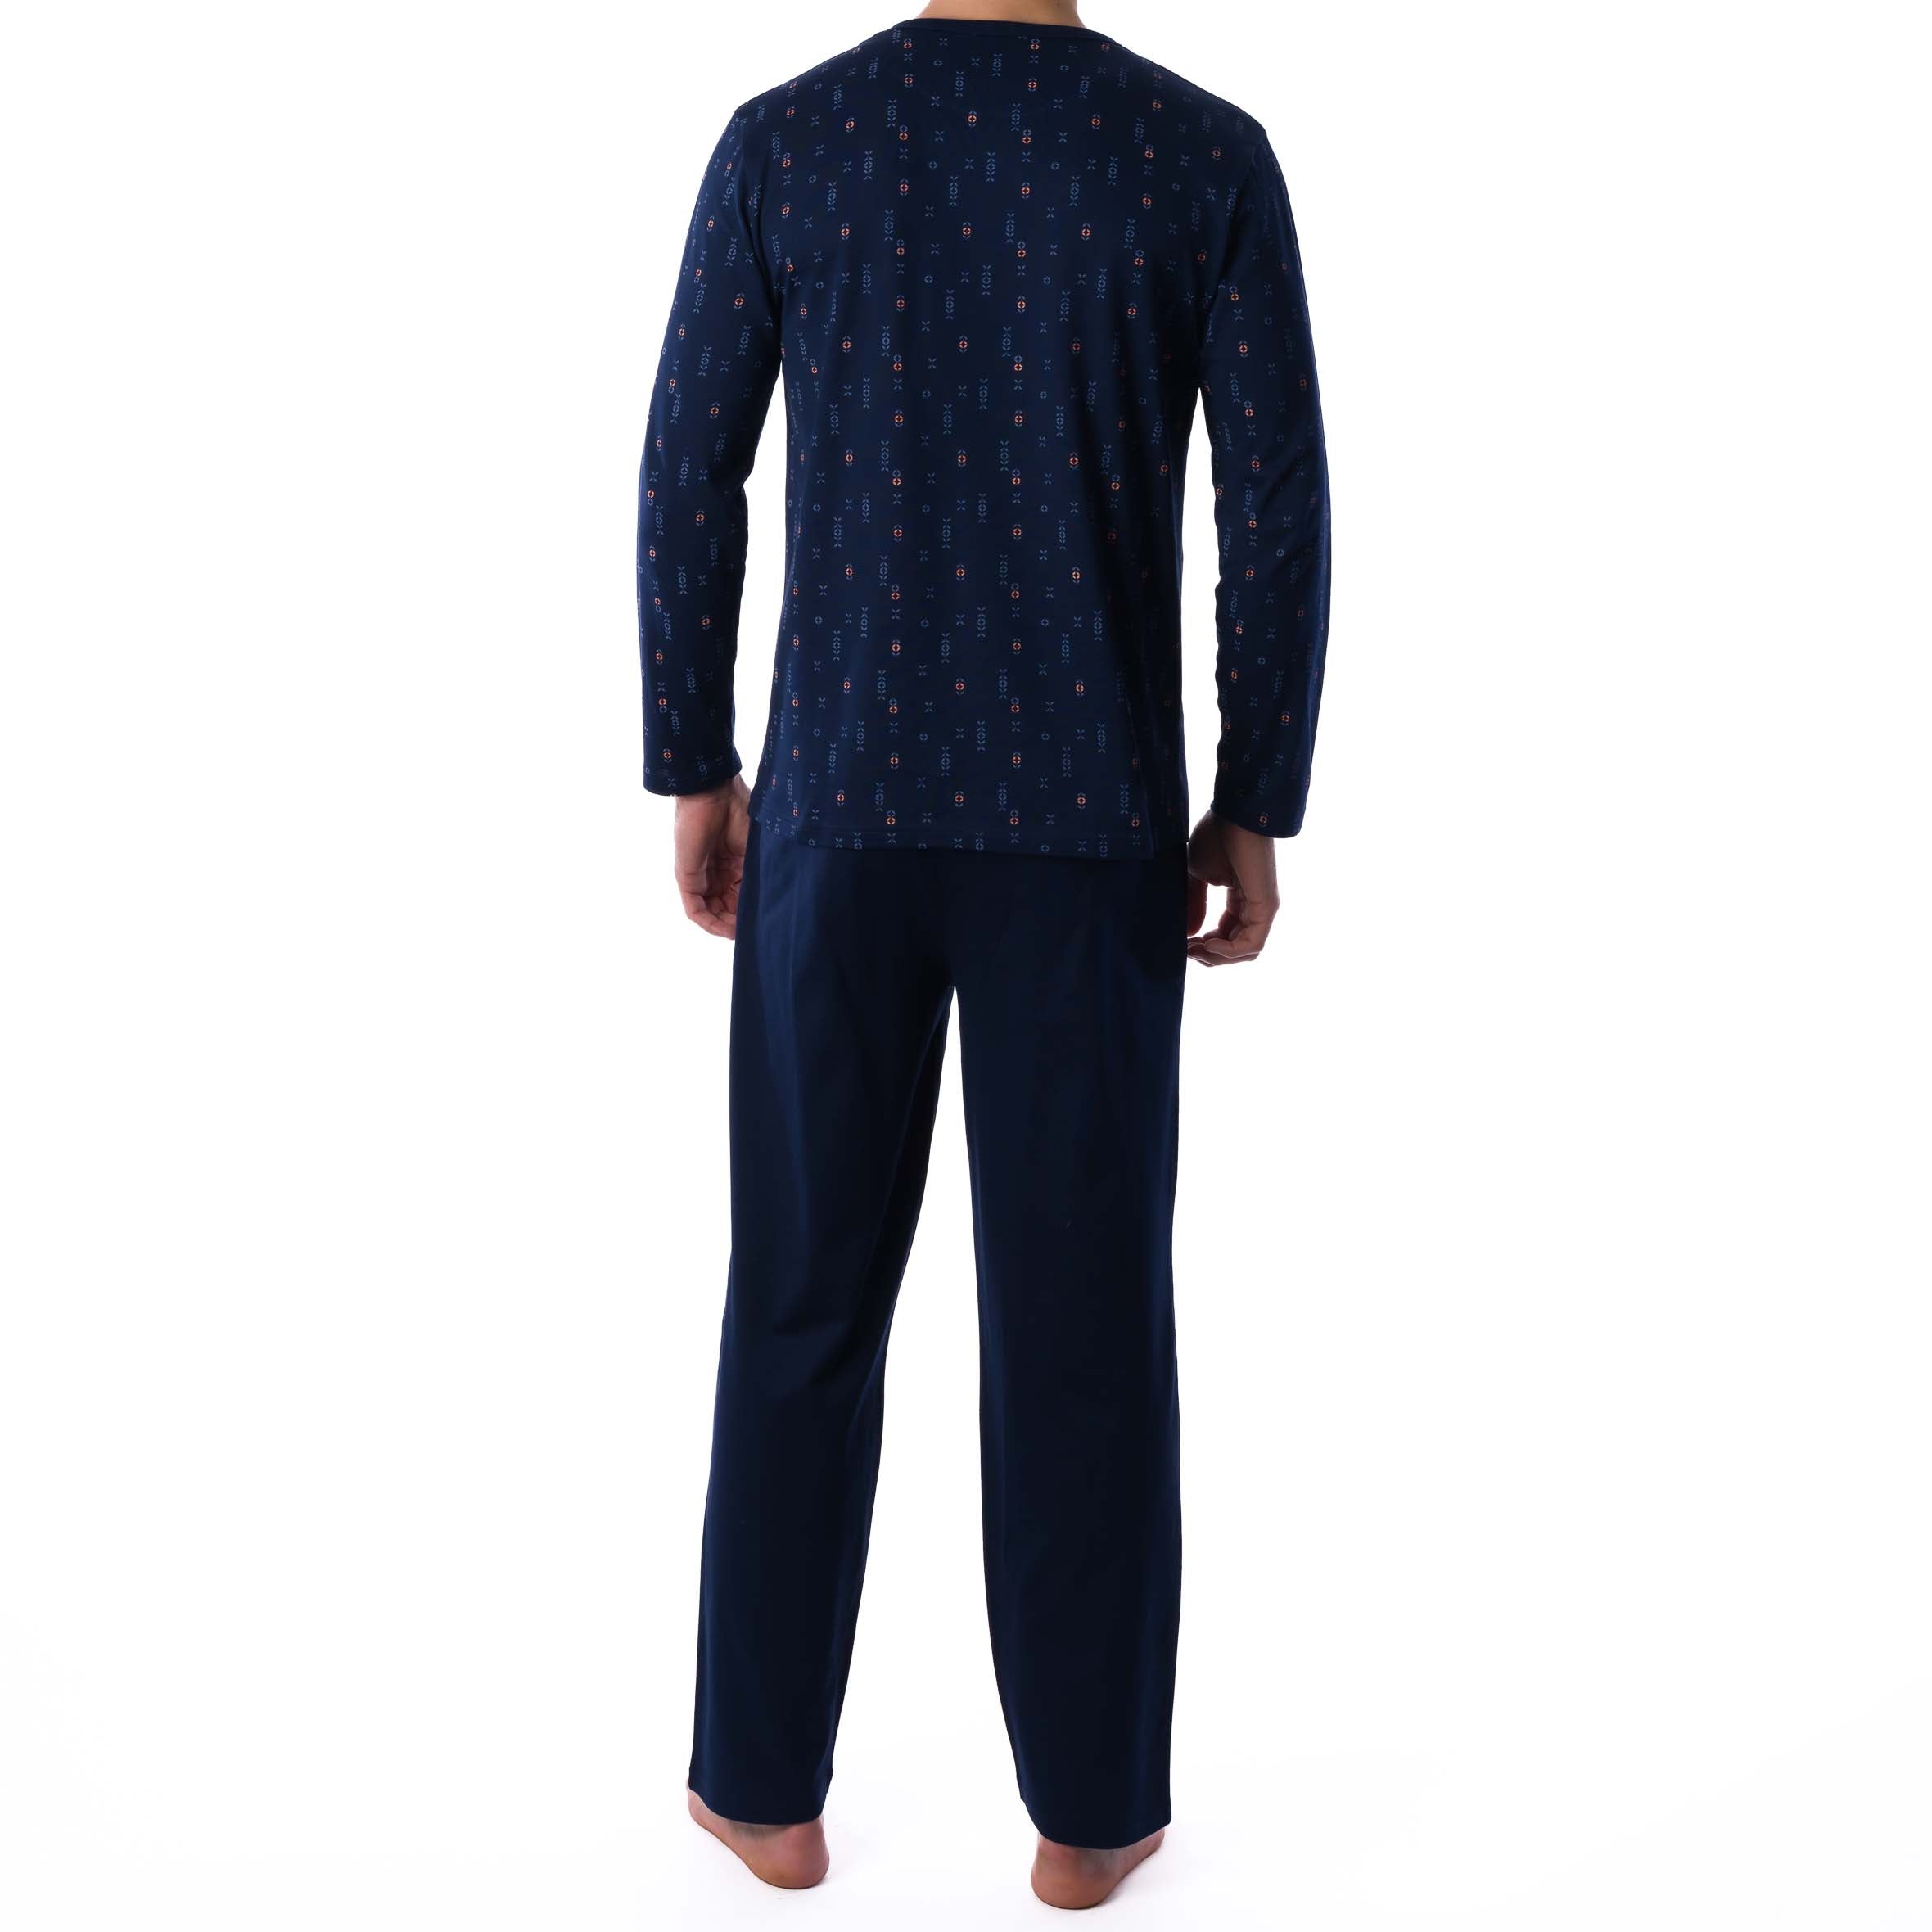 Buttoned Collar Pajamas in Navy Blue Printed Mercerized Cotton Jersey